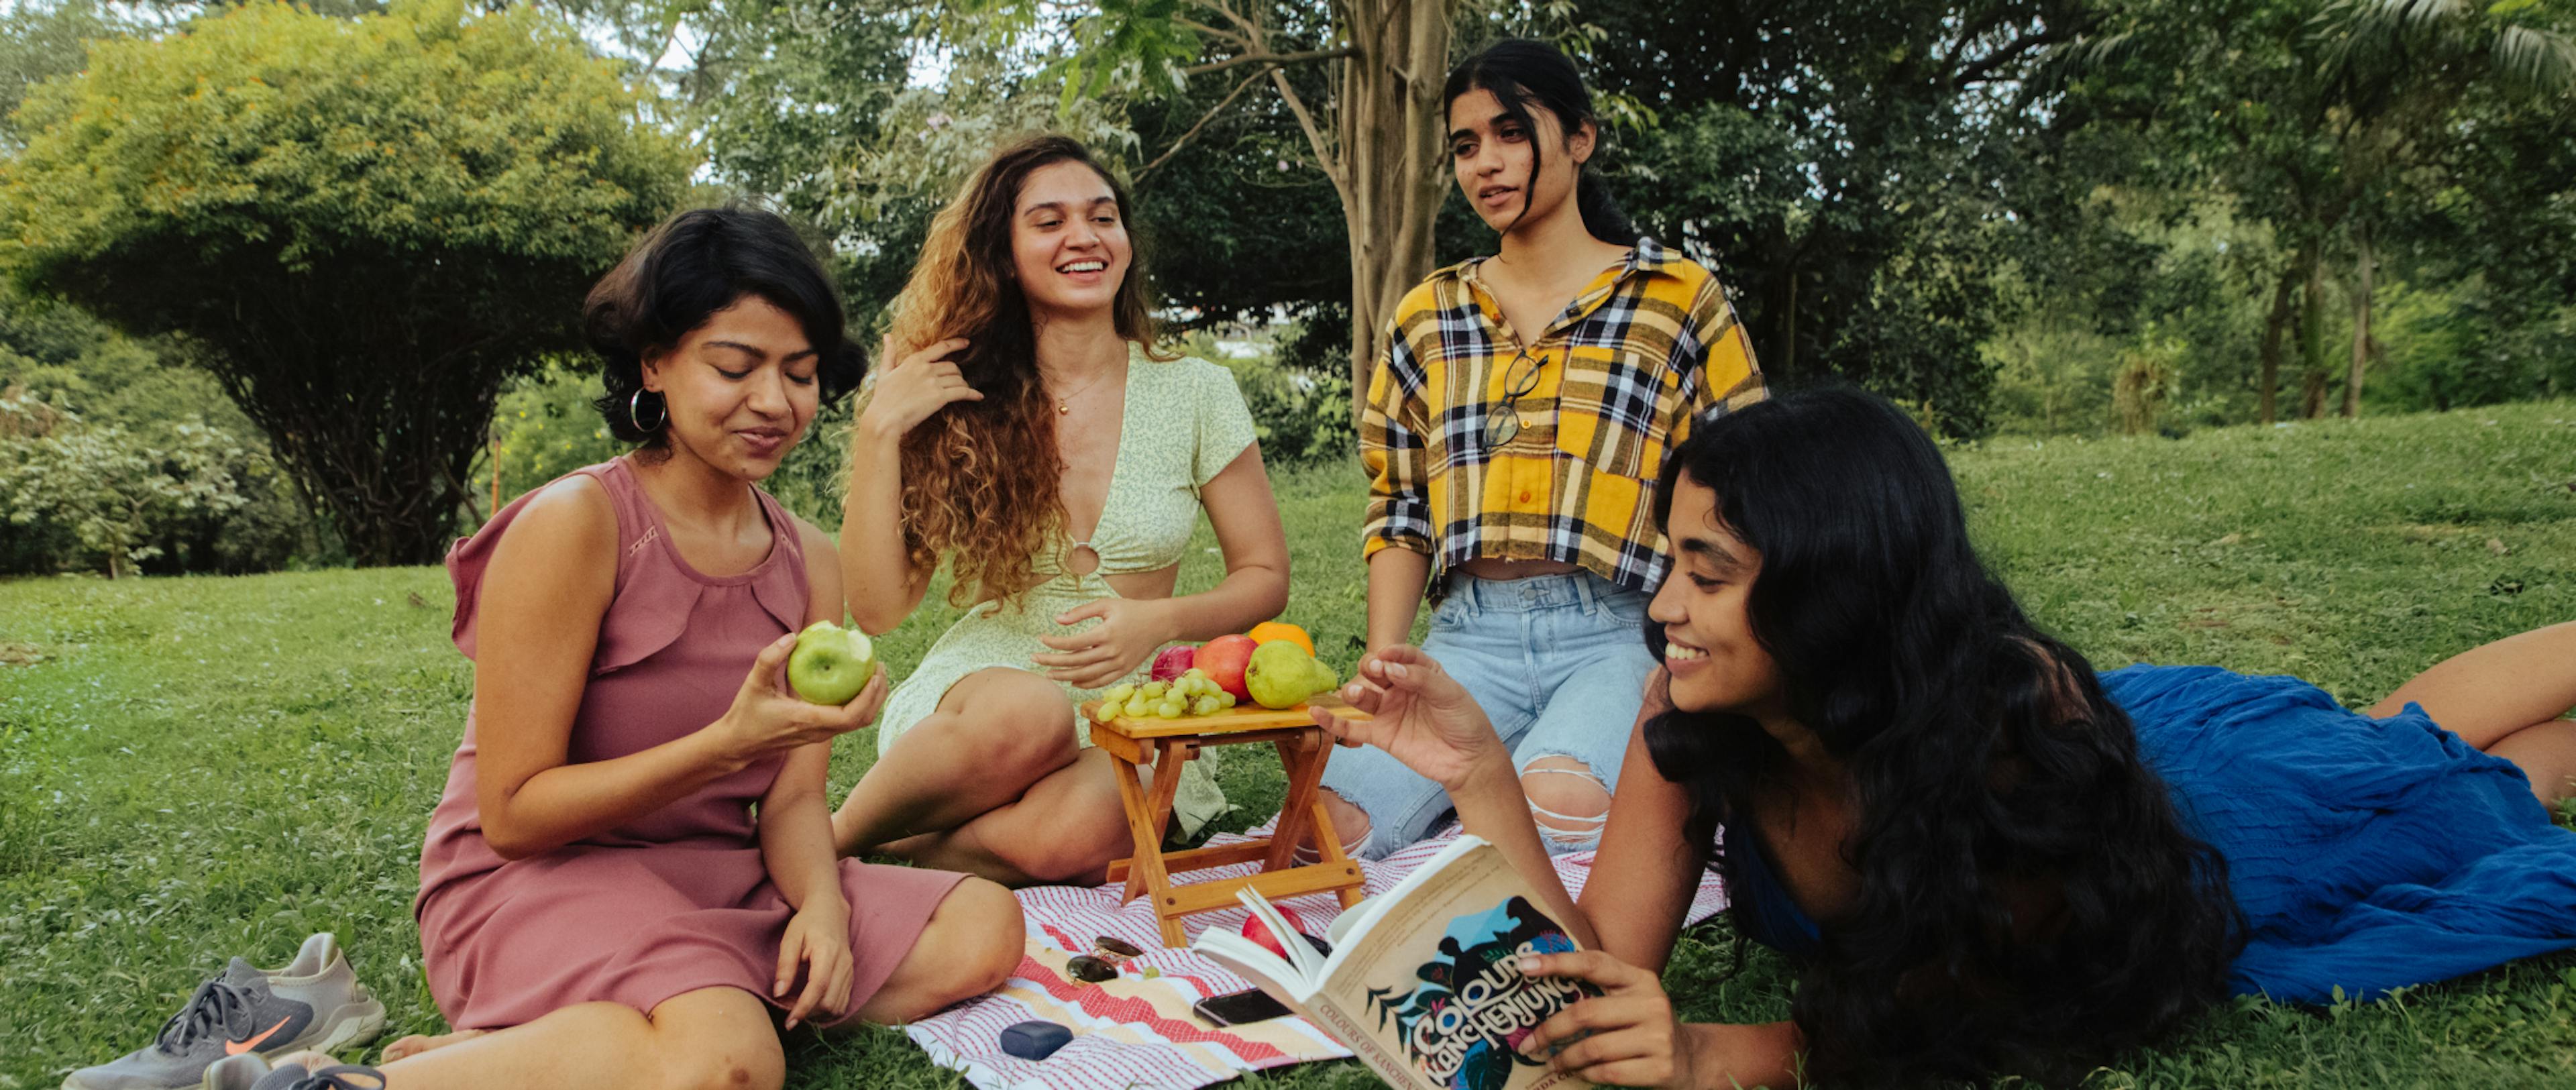 A group of girls with glowing skin eating healthy foods that help with nutrition for their skin.